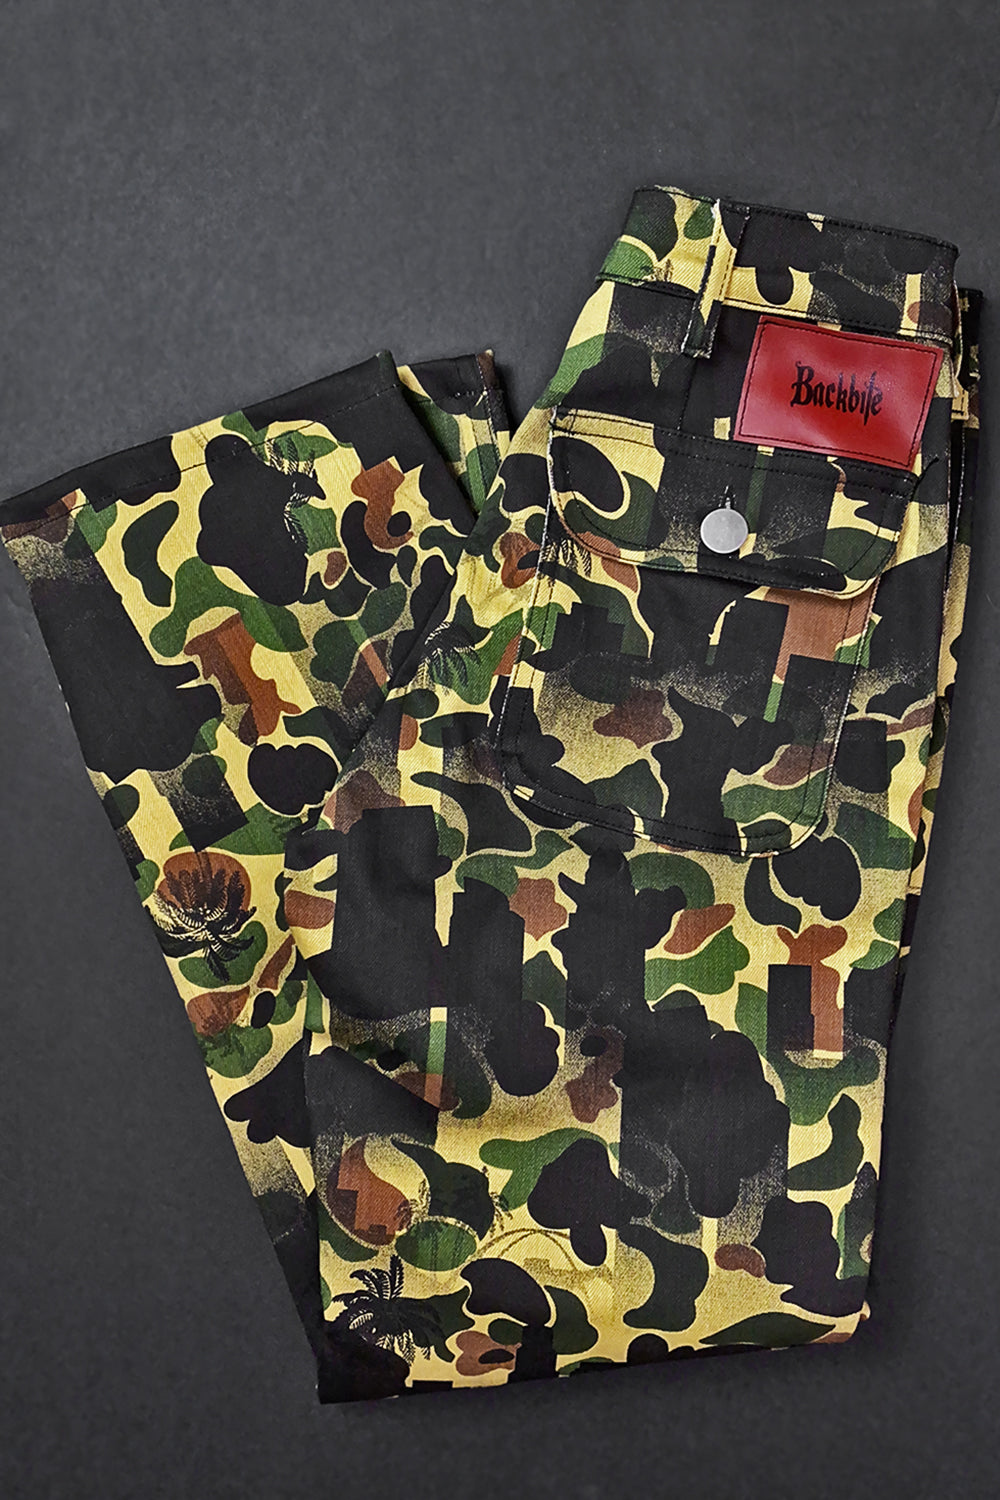 OG-107 Utility Pants: Camo (Limited Edition) | Sold Out